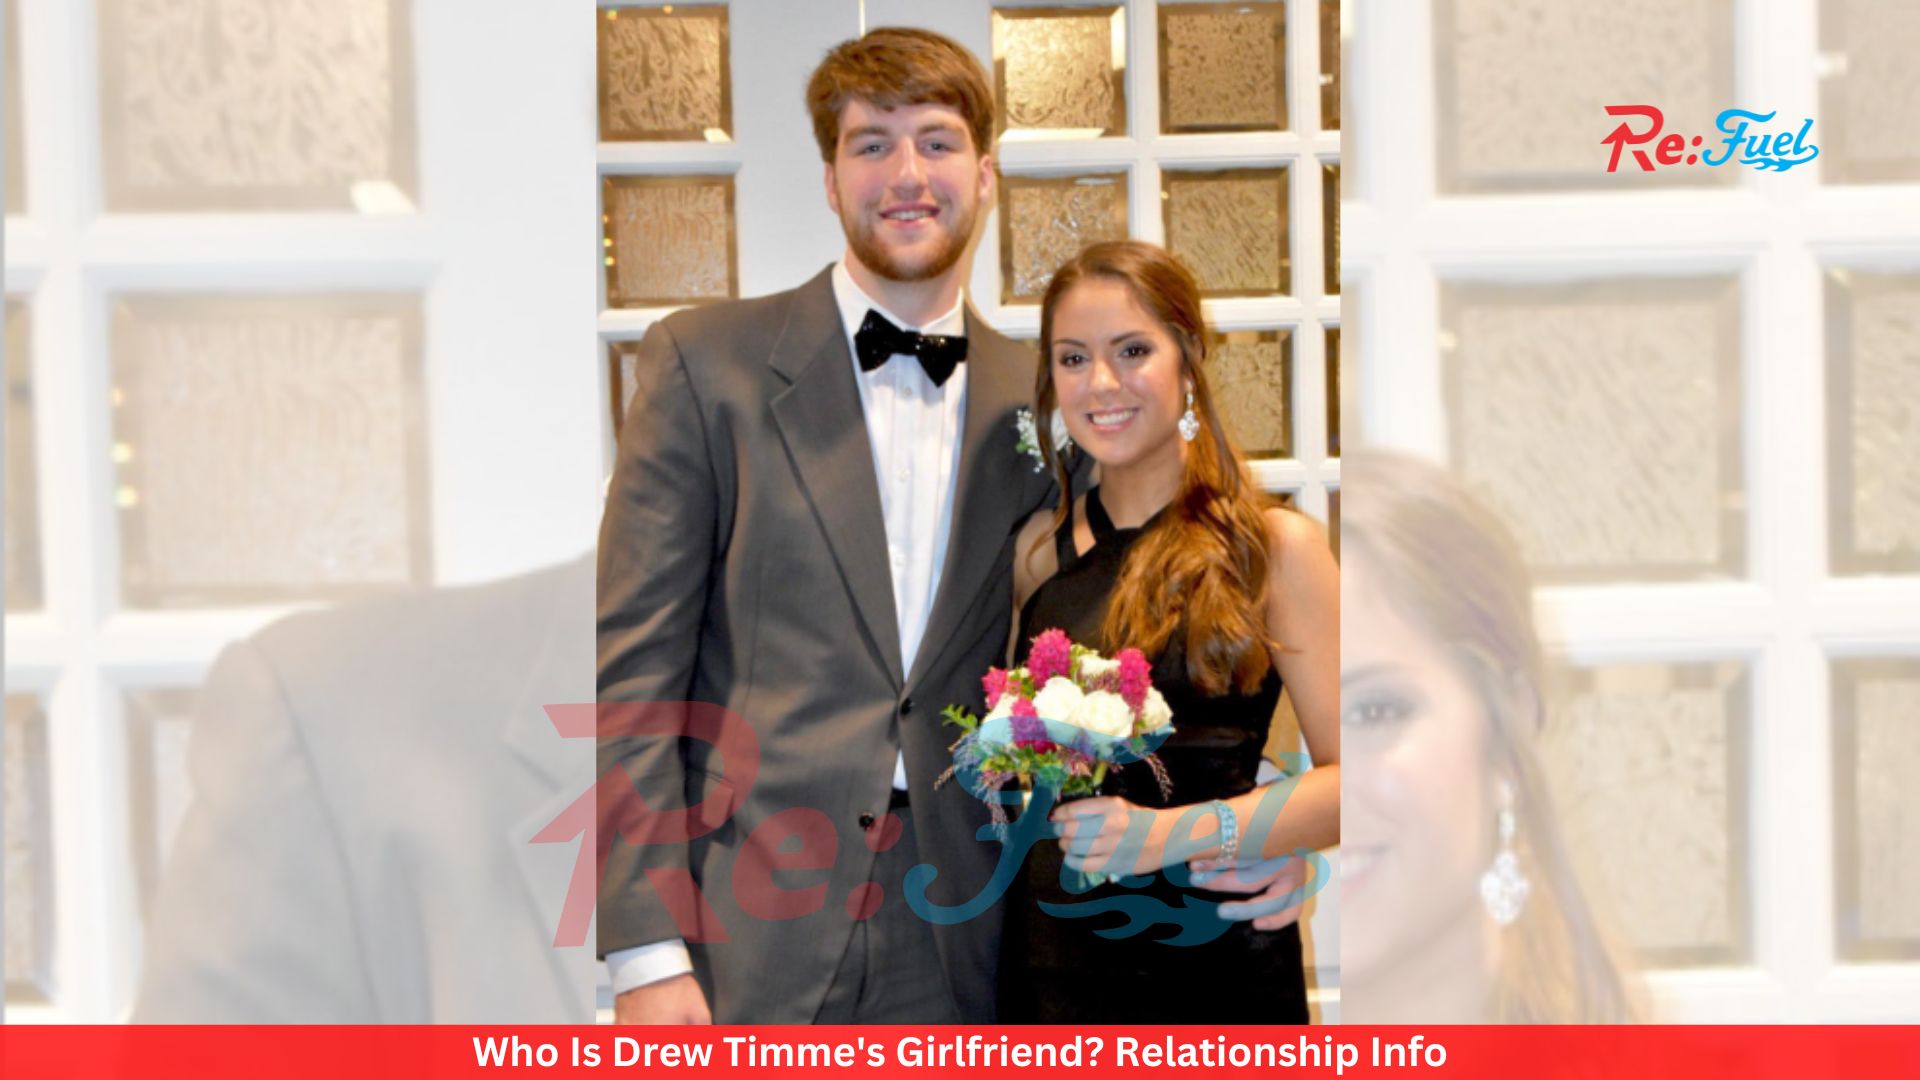 Who Is Drew Timme's Girlfriend? Relationship Info